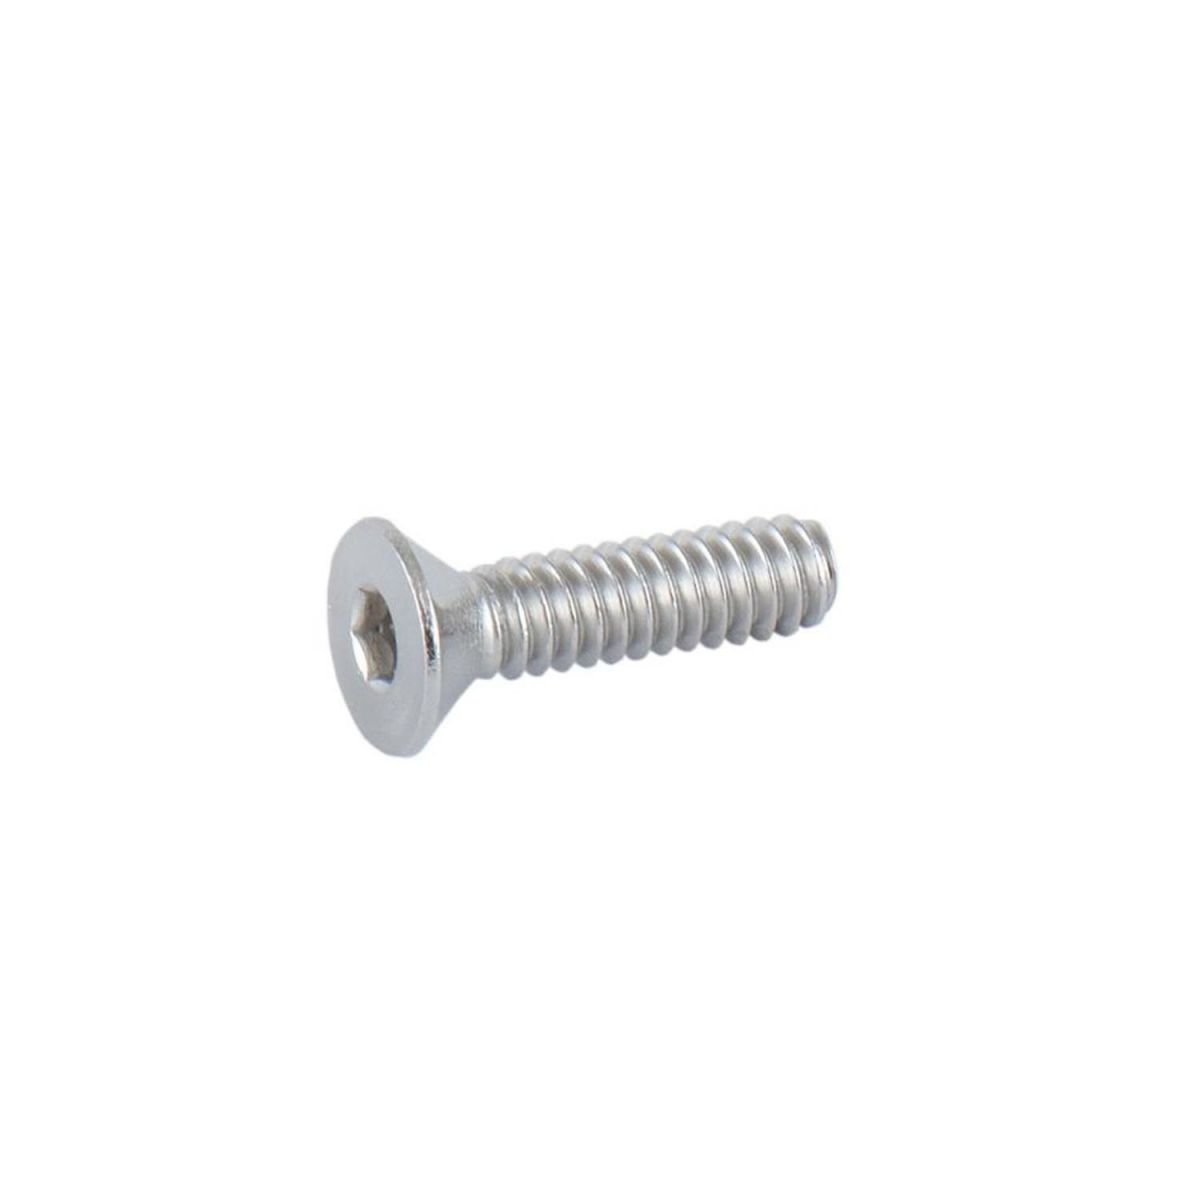 BSS Countersunk Screw for Sight Plate UNC Nr. 10 - 24" x 3/4"